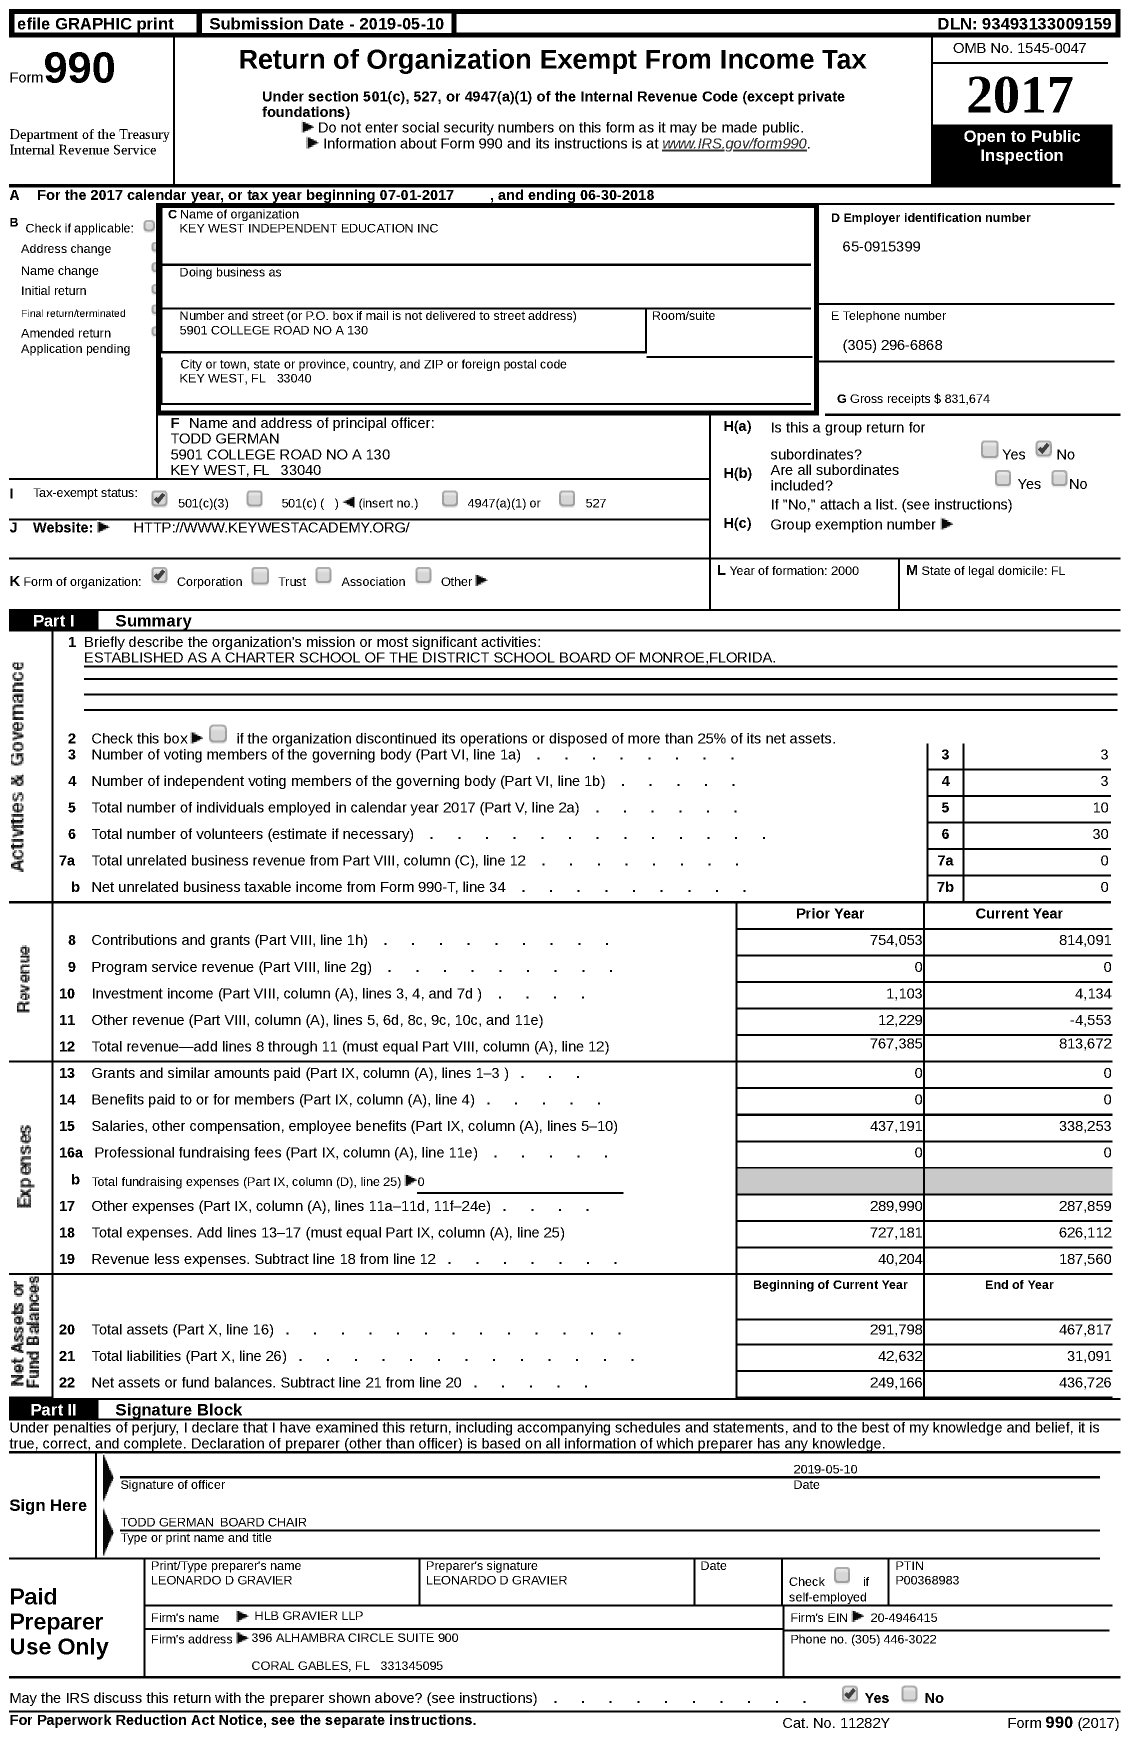 Image of first page of 2017 Form 990 for Key West Independent Education